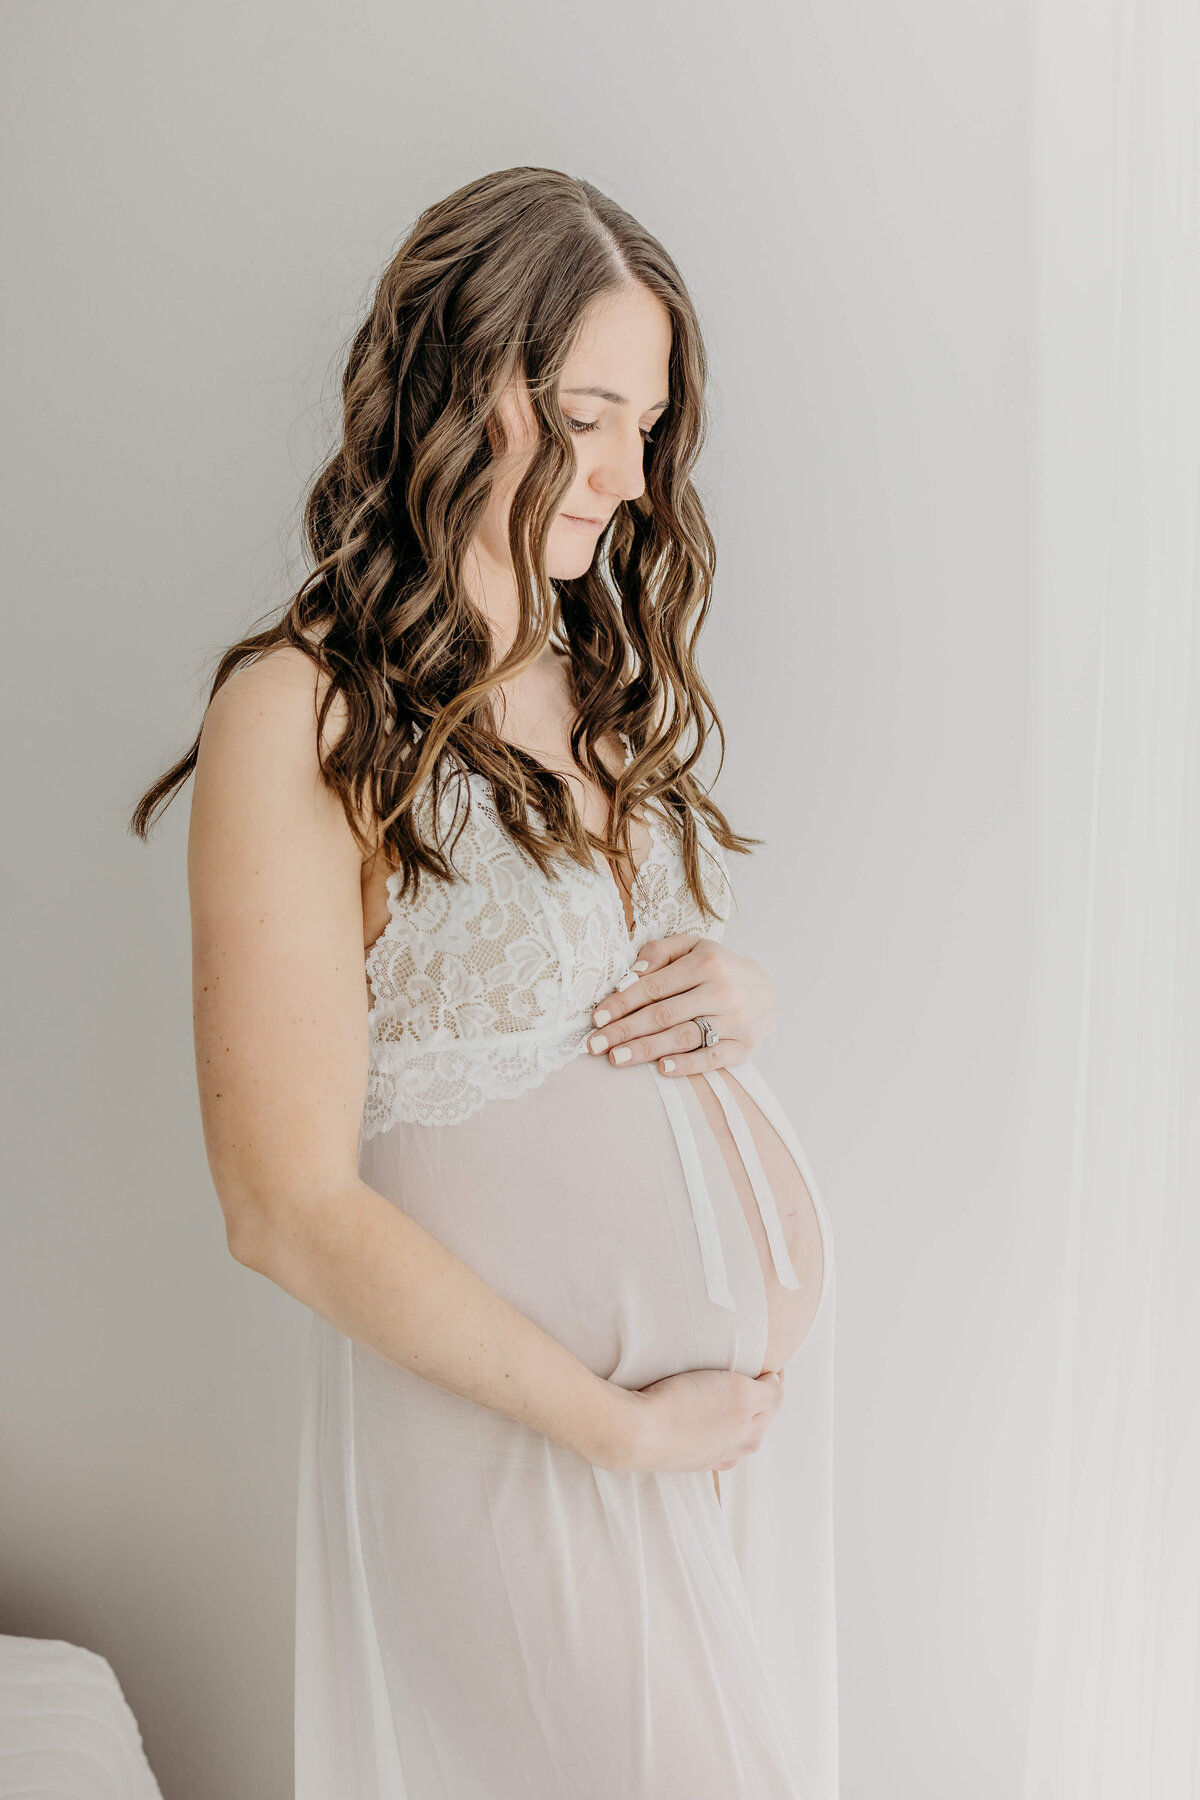 Young mother holding baby in the belly in sheer white intimate maternity photo